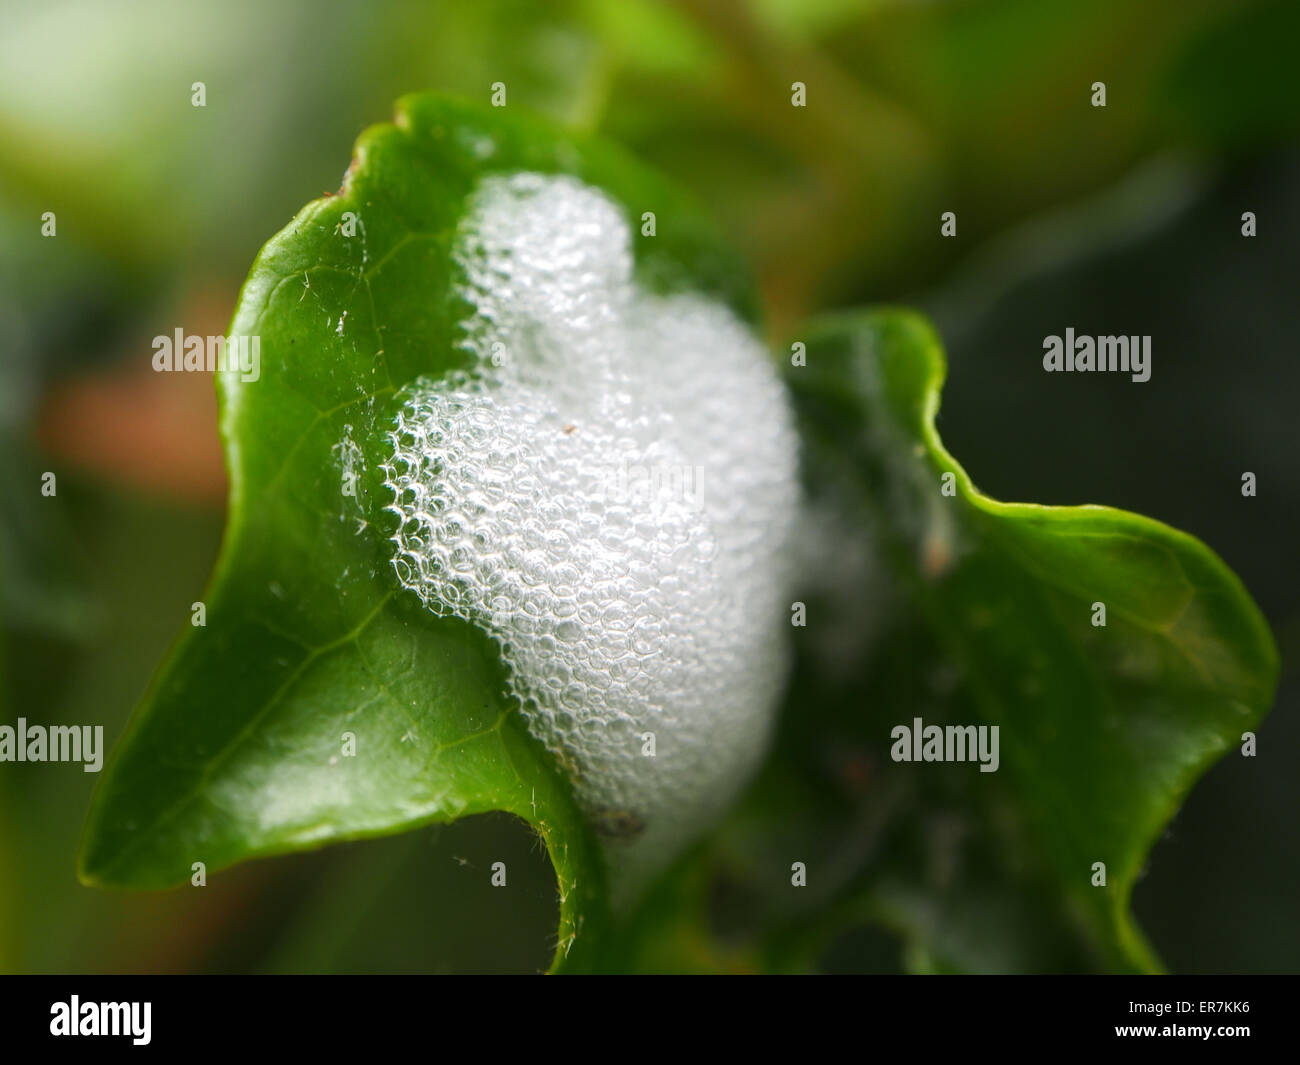 The protective covering of a spittlebug (Cercopidae family) on a leaf Stock Photo